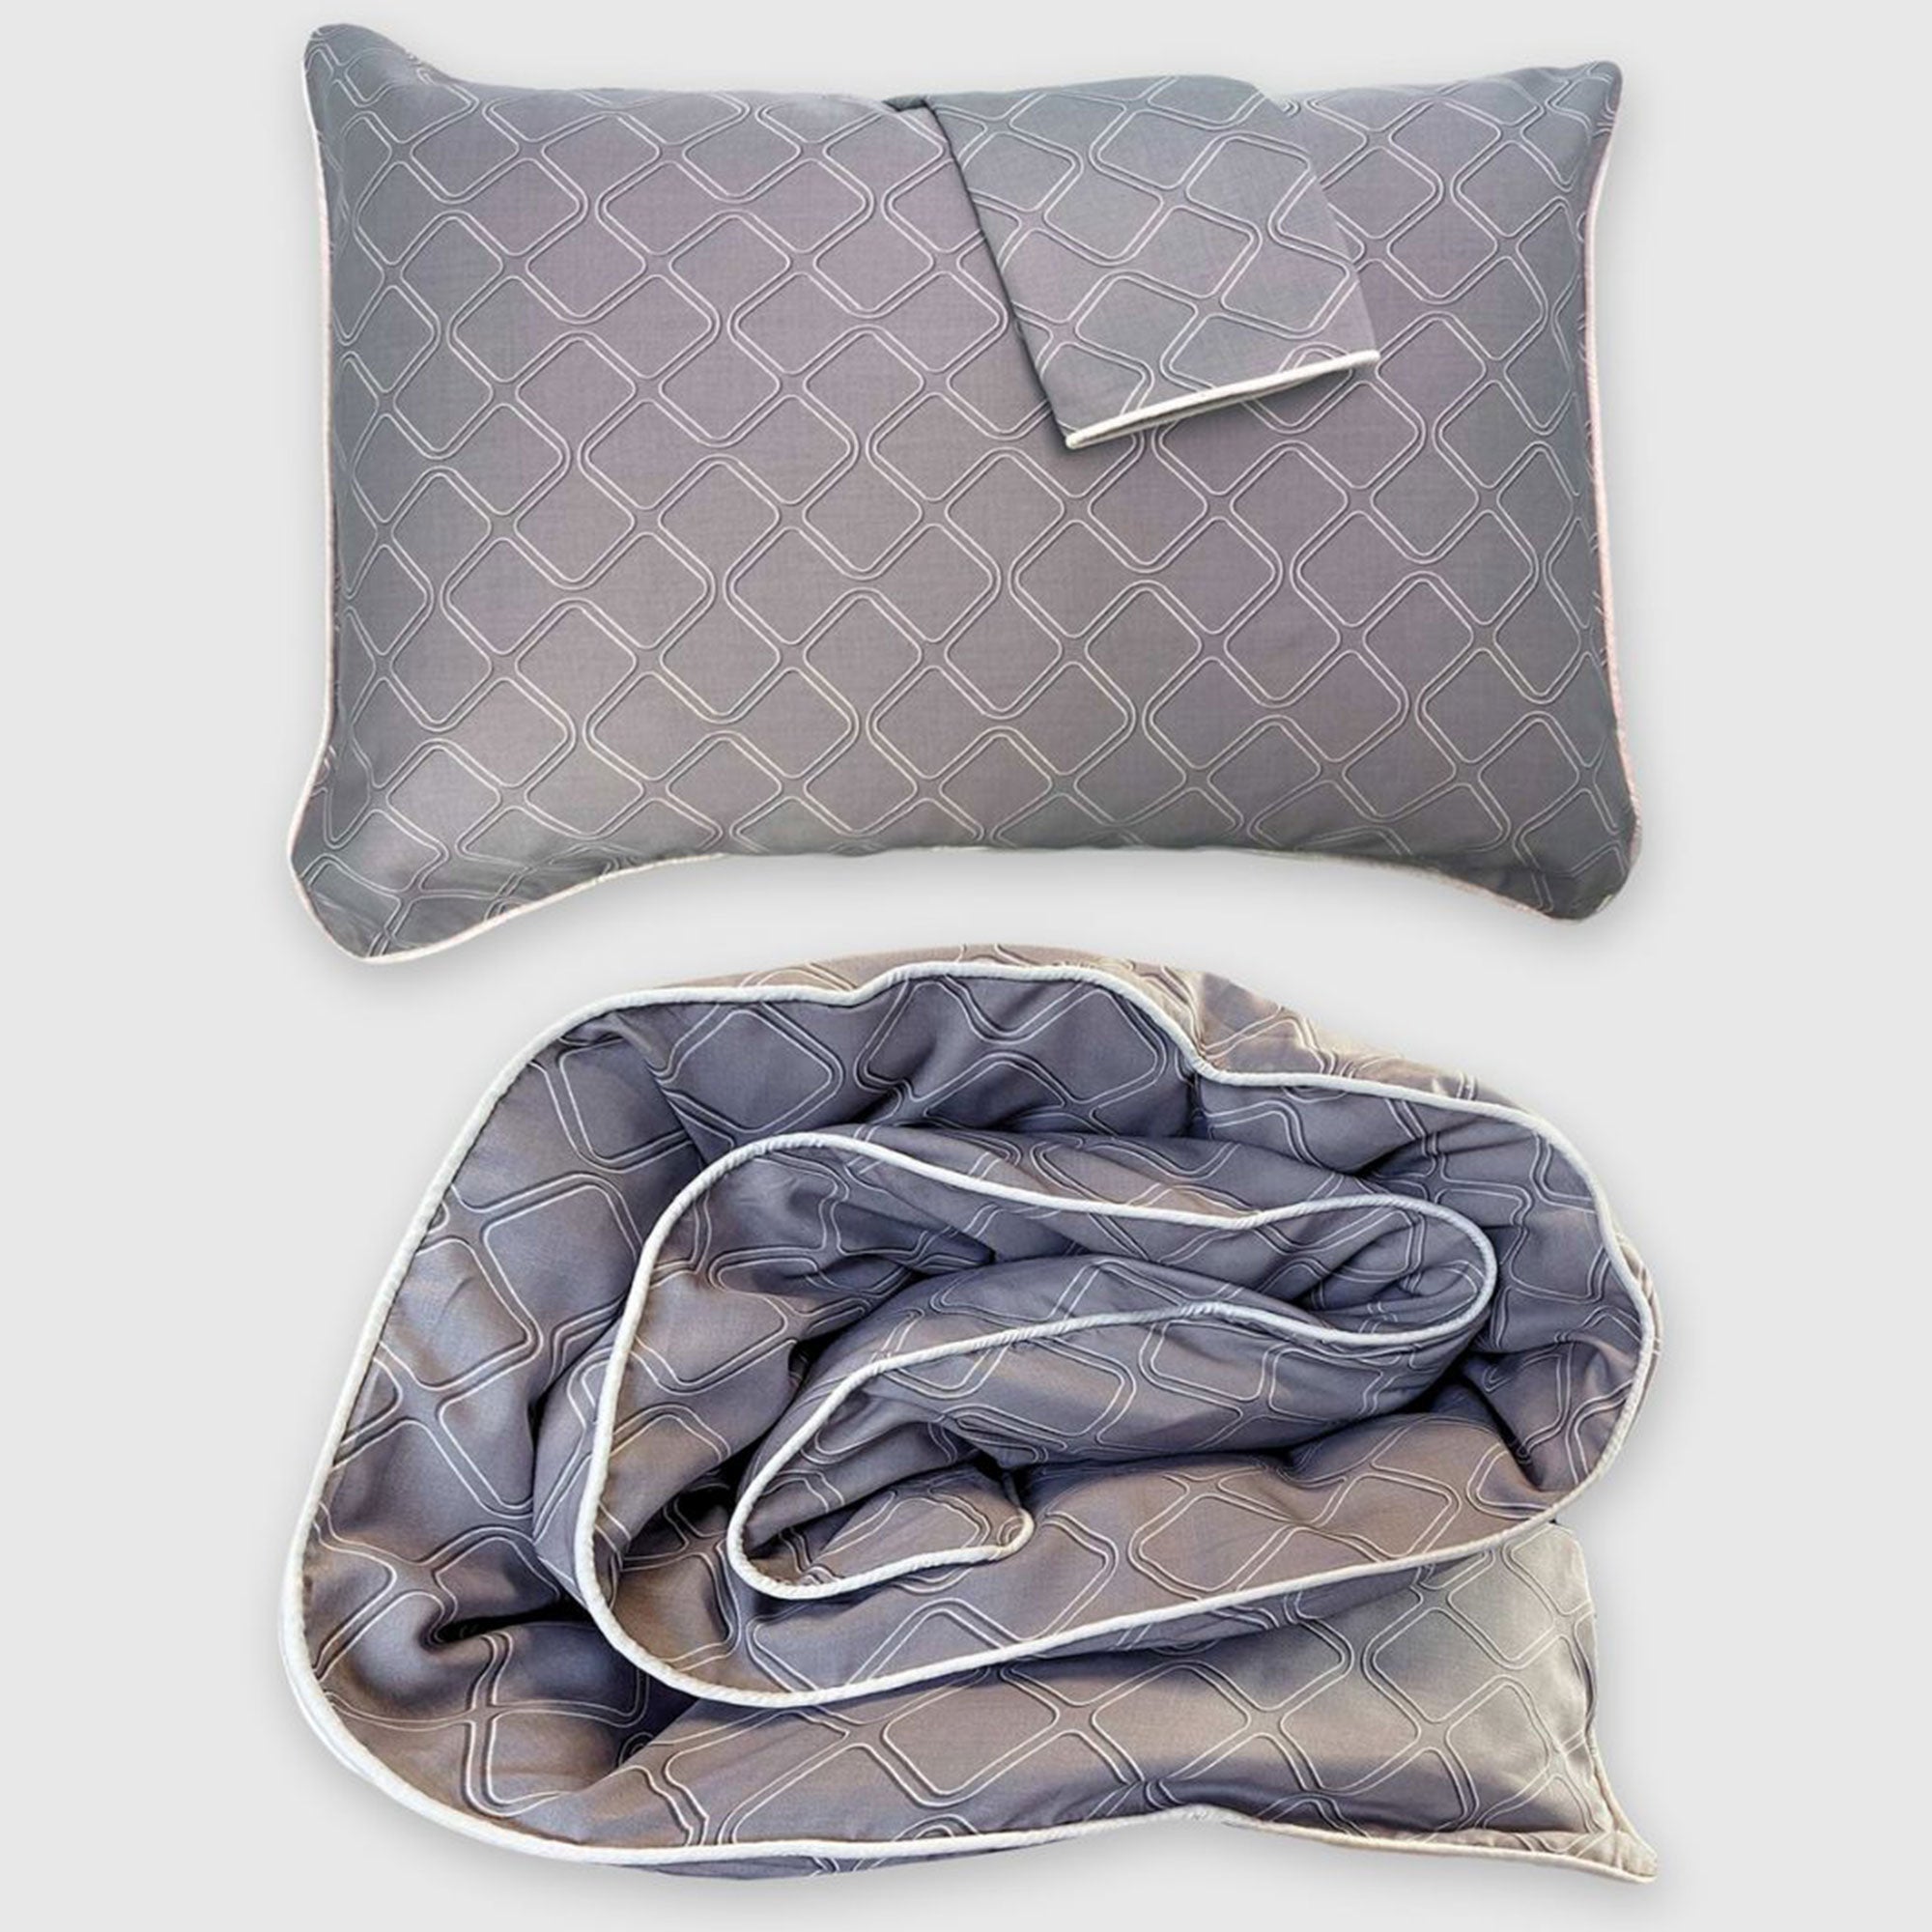 dark gray platinum and white duvet cover set with standard sham pillow floating above it